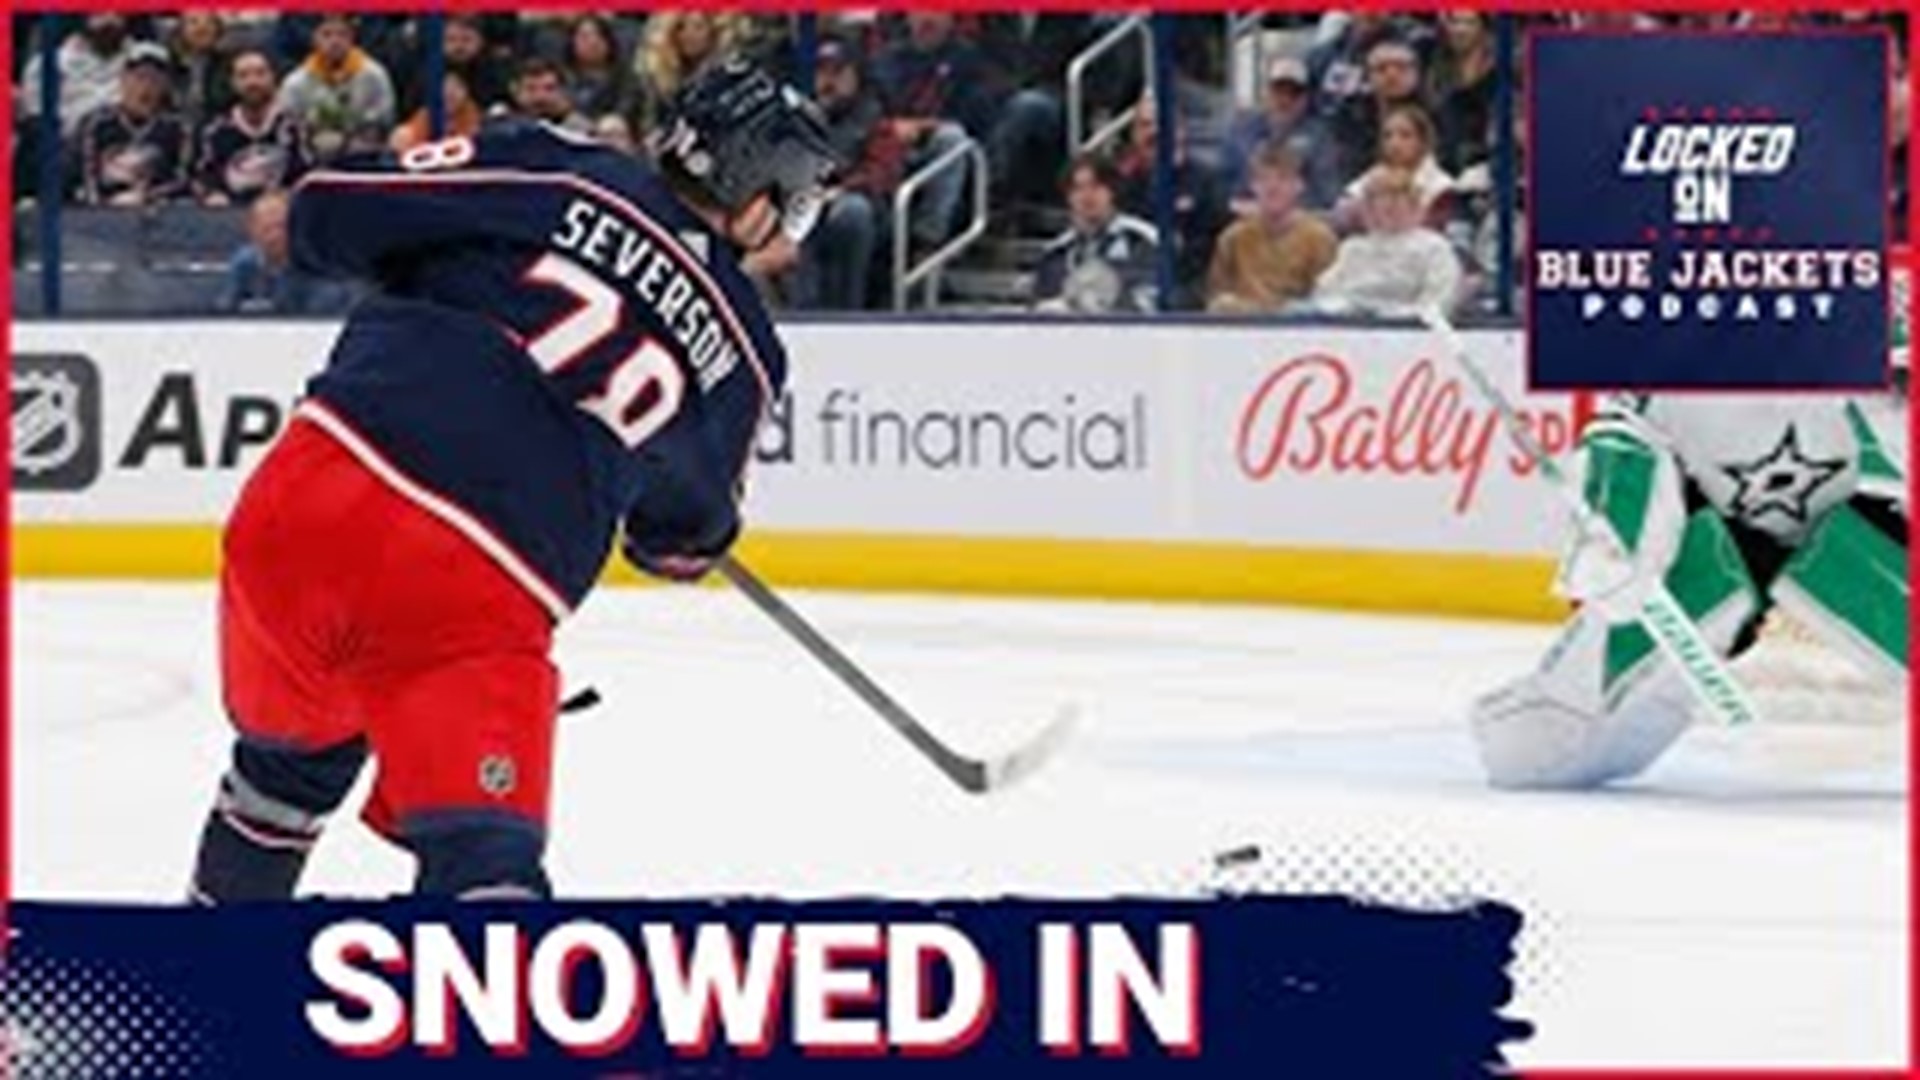 Last night wasn't pretty, as the Blue Jackets got outshot 51-24 and lost 6-1 to the inevitable Avs. Now they have to play Vegas, can they recreate their earlier win?